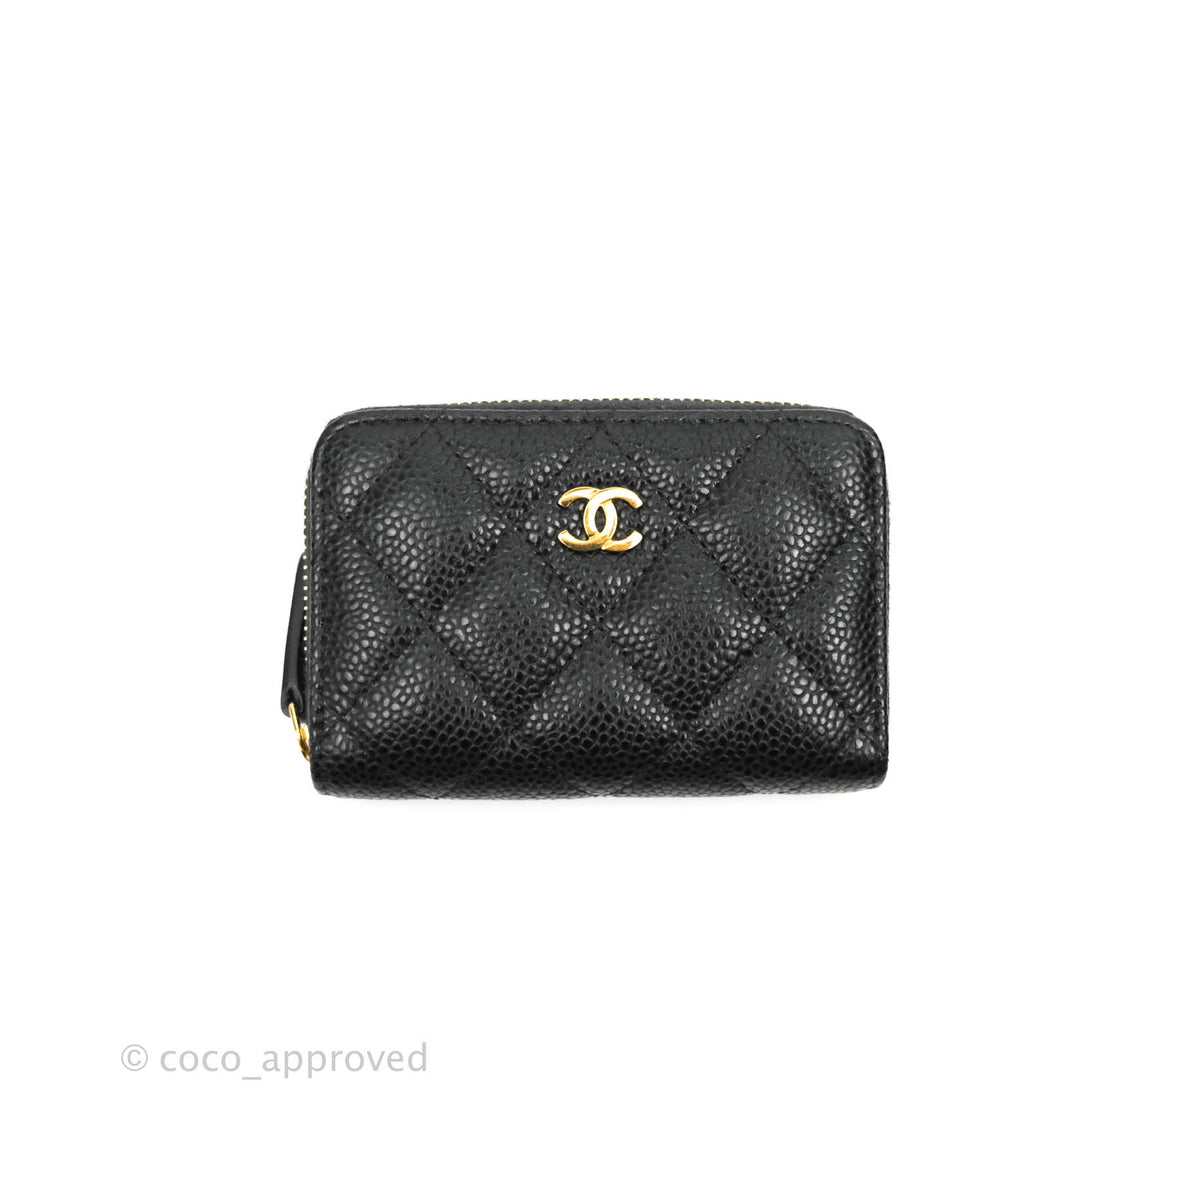 CHANEL Caviar Quilted Zip Coin Purse Black 1292709